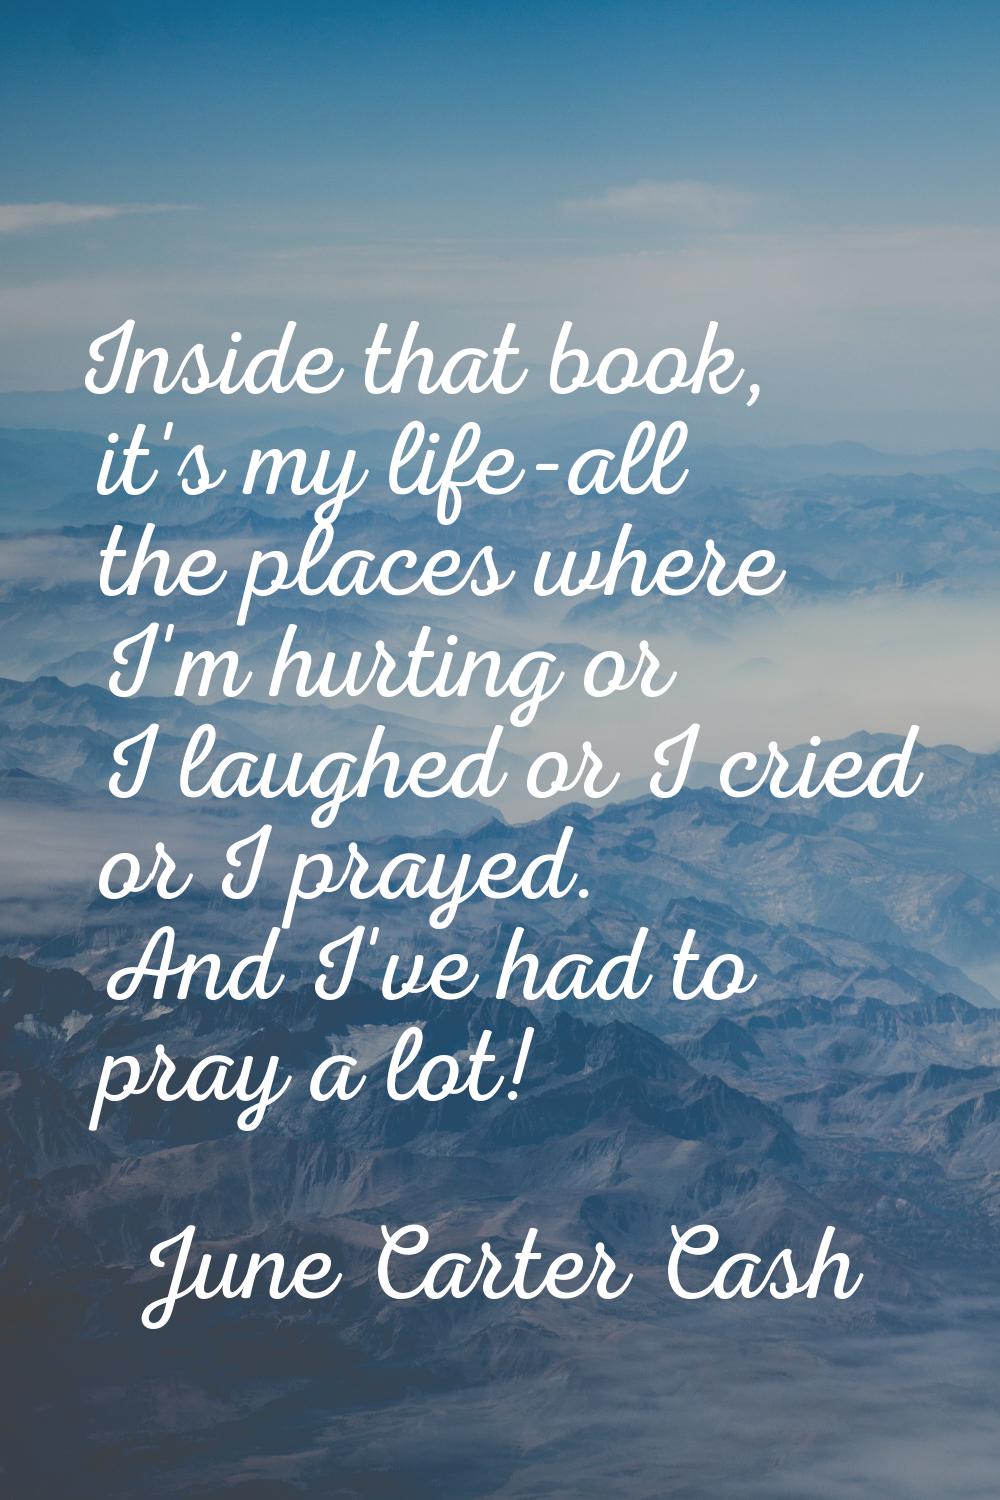 Inside that book, it's my life-all the places where I'm hurting or I laughed or I cried or I prayed